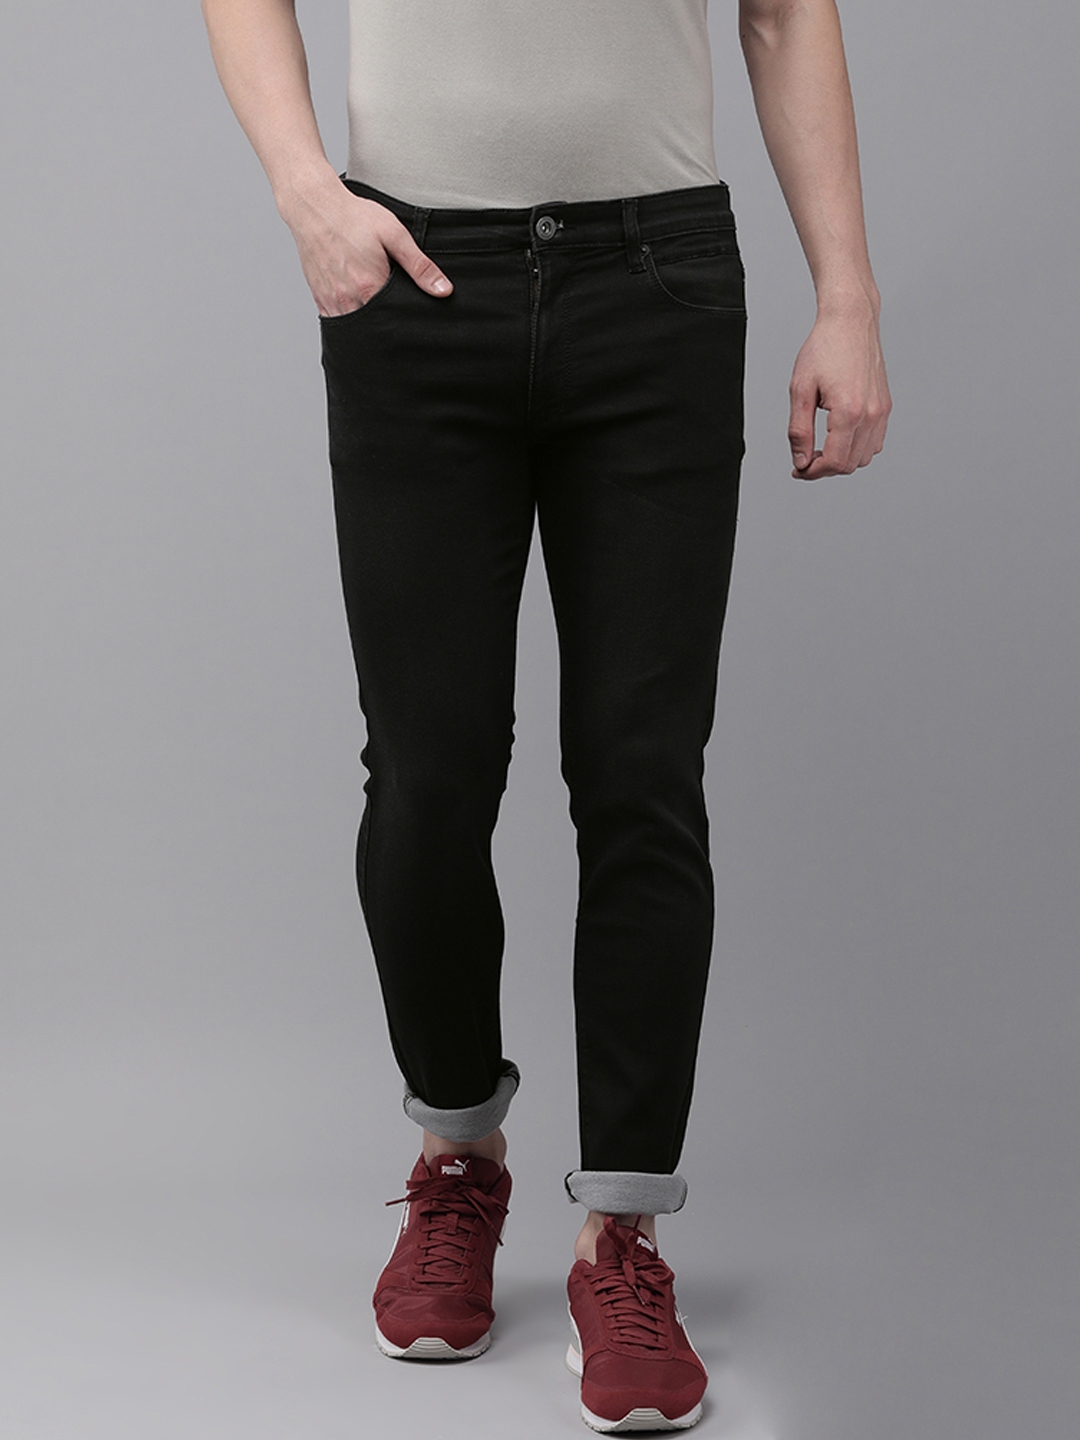 Buy BEAT LONDON By PEPE JEANS Men CHRIS CHINOX Black Stretchable Jeans ...